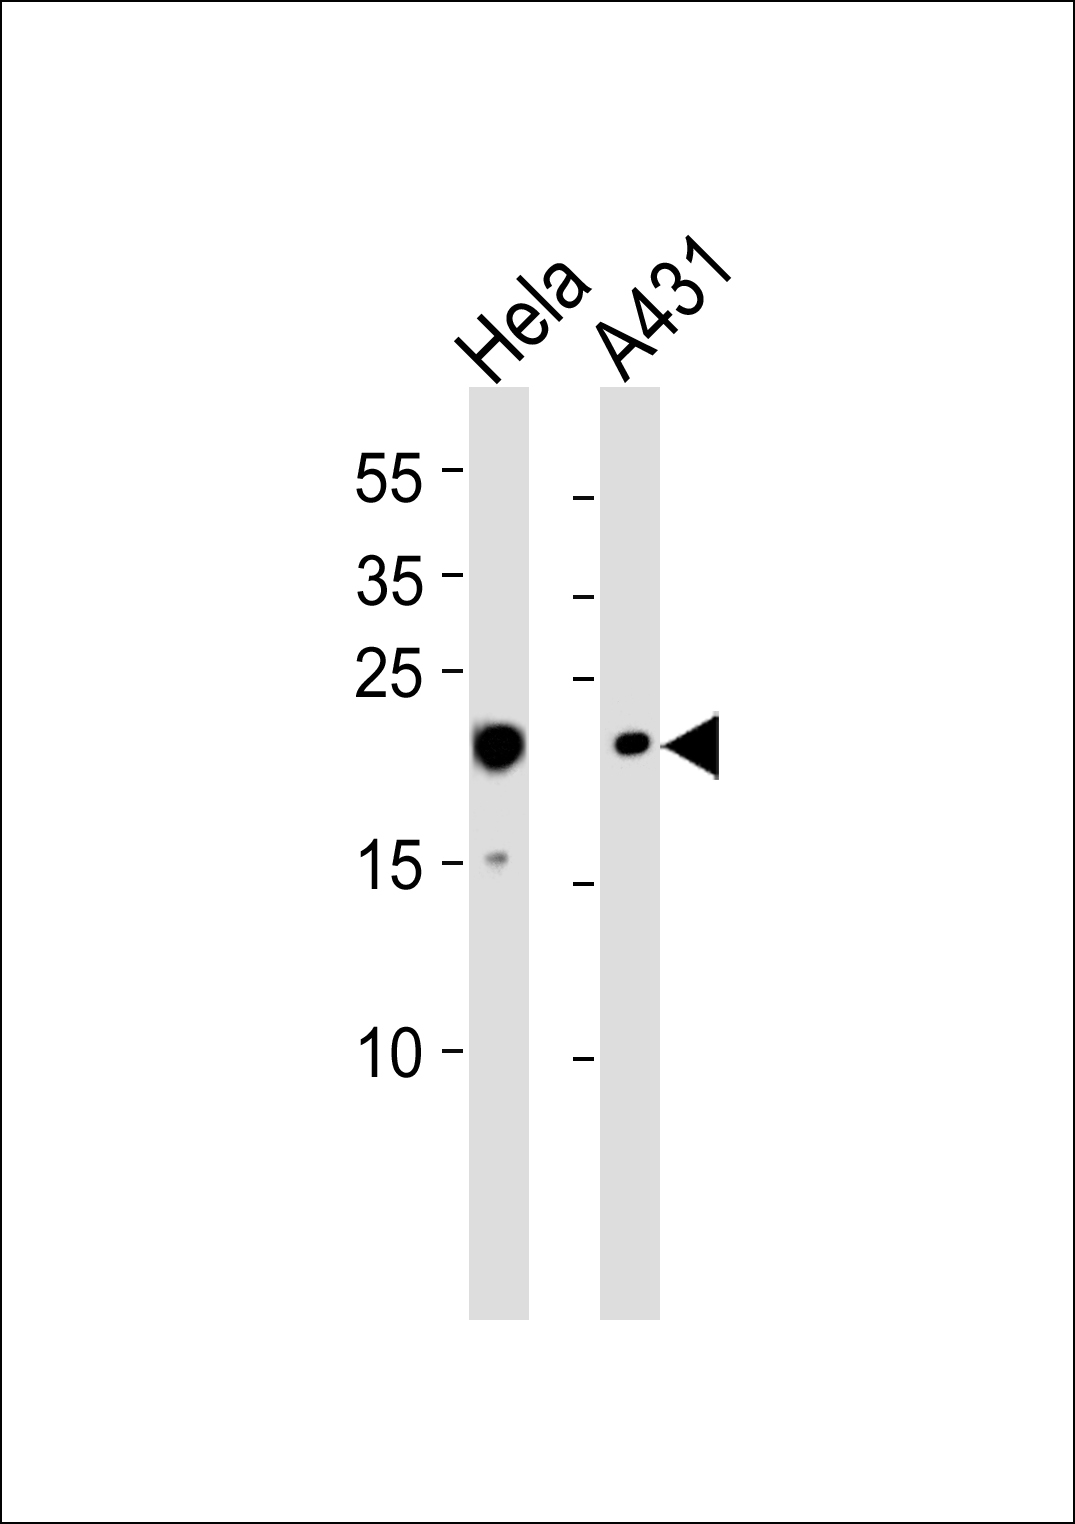 TOMM20 Antibody (OAAB18573) in Hela, A431 cell line (from left to right) using Western Blot